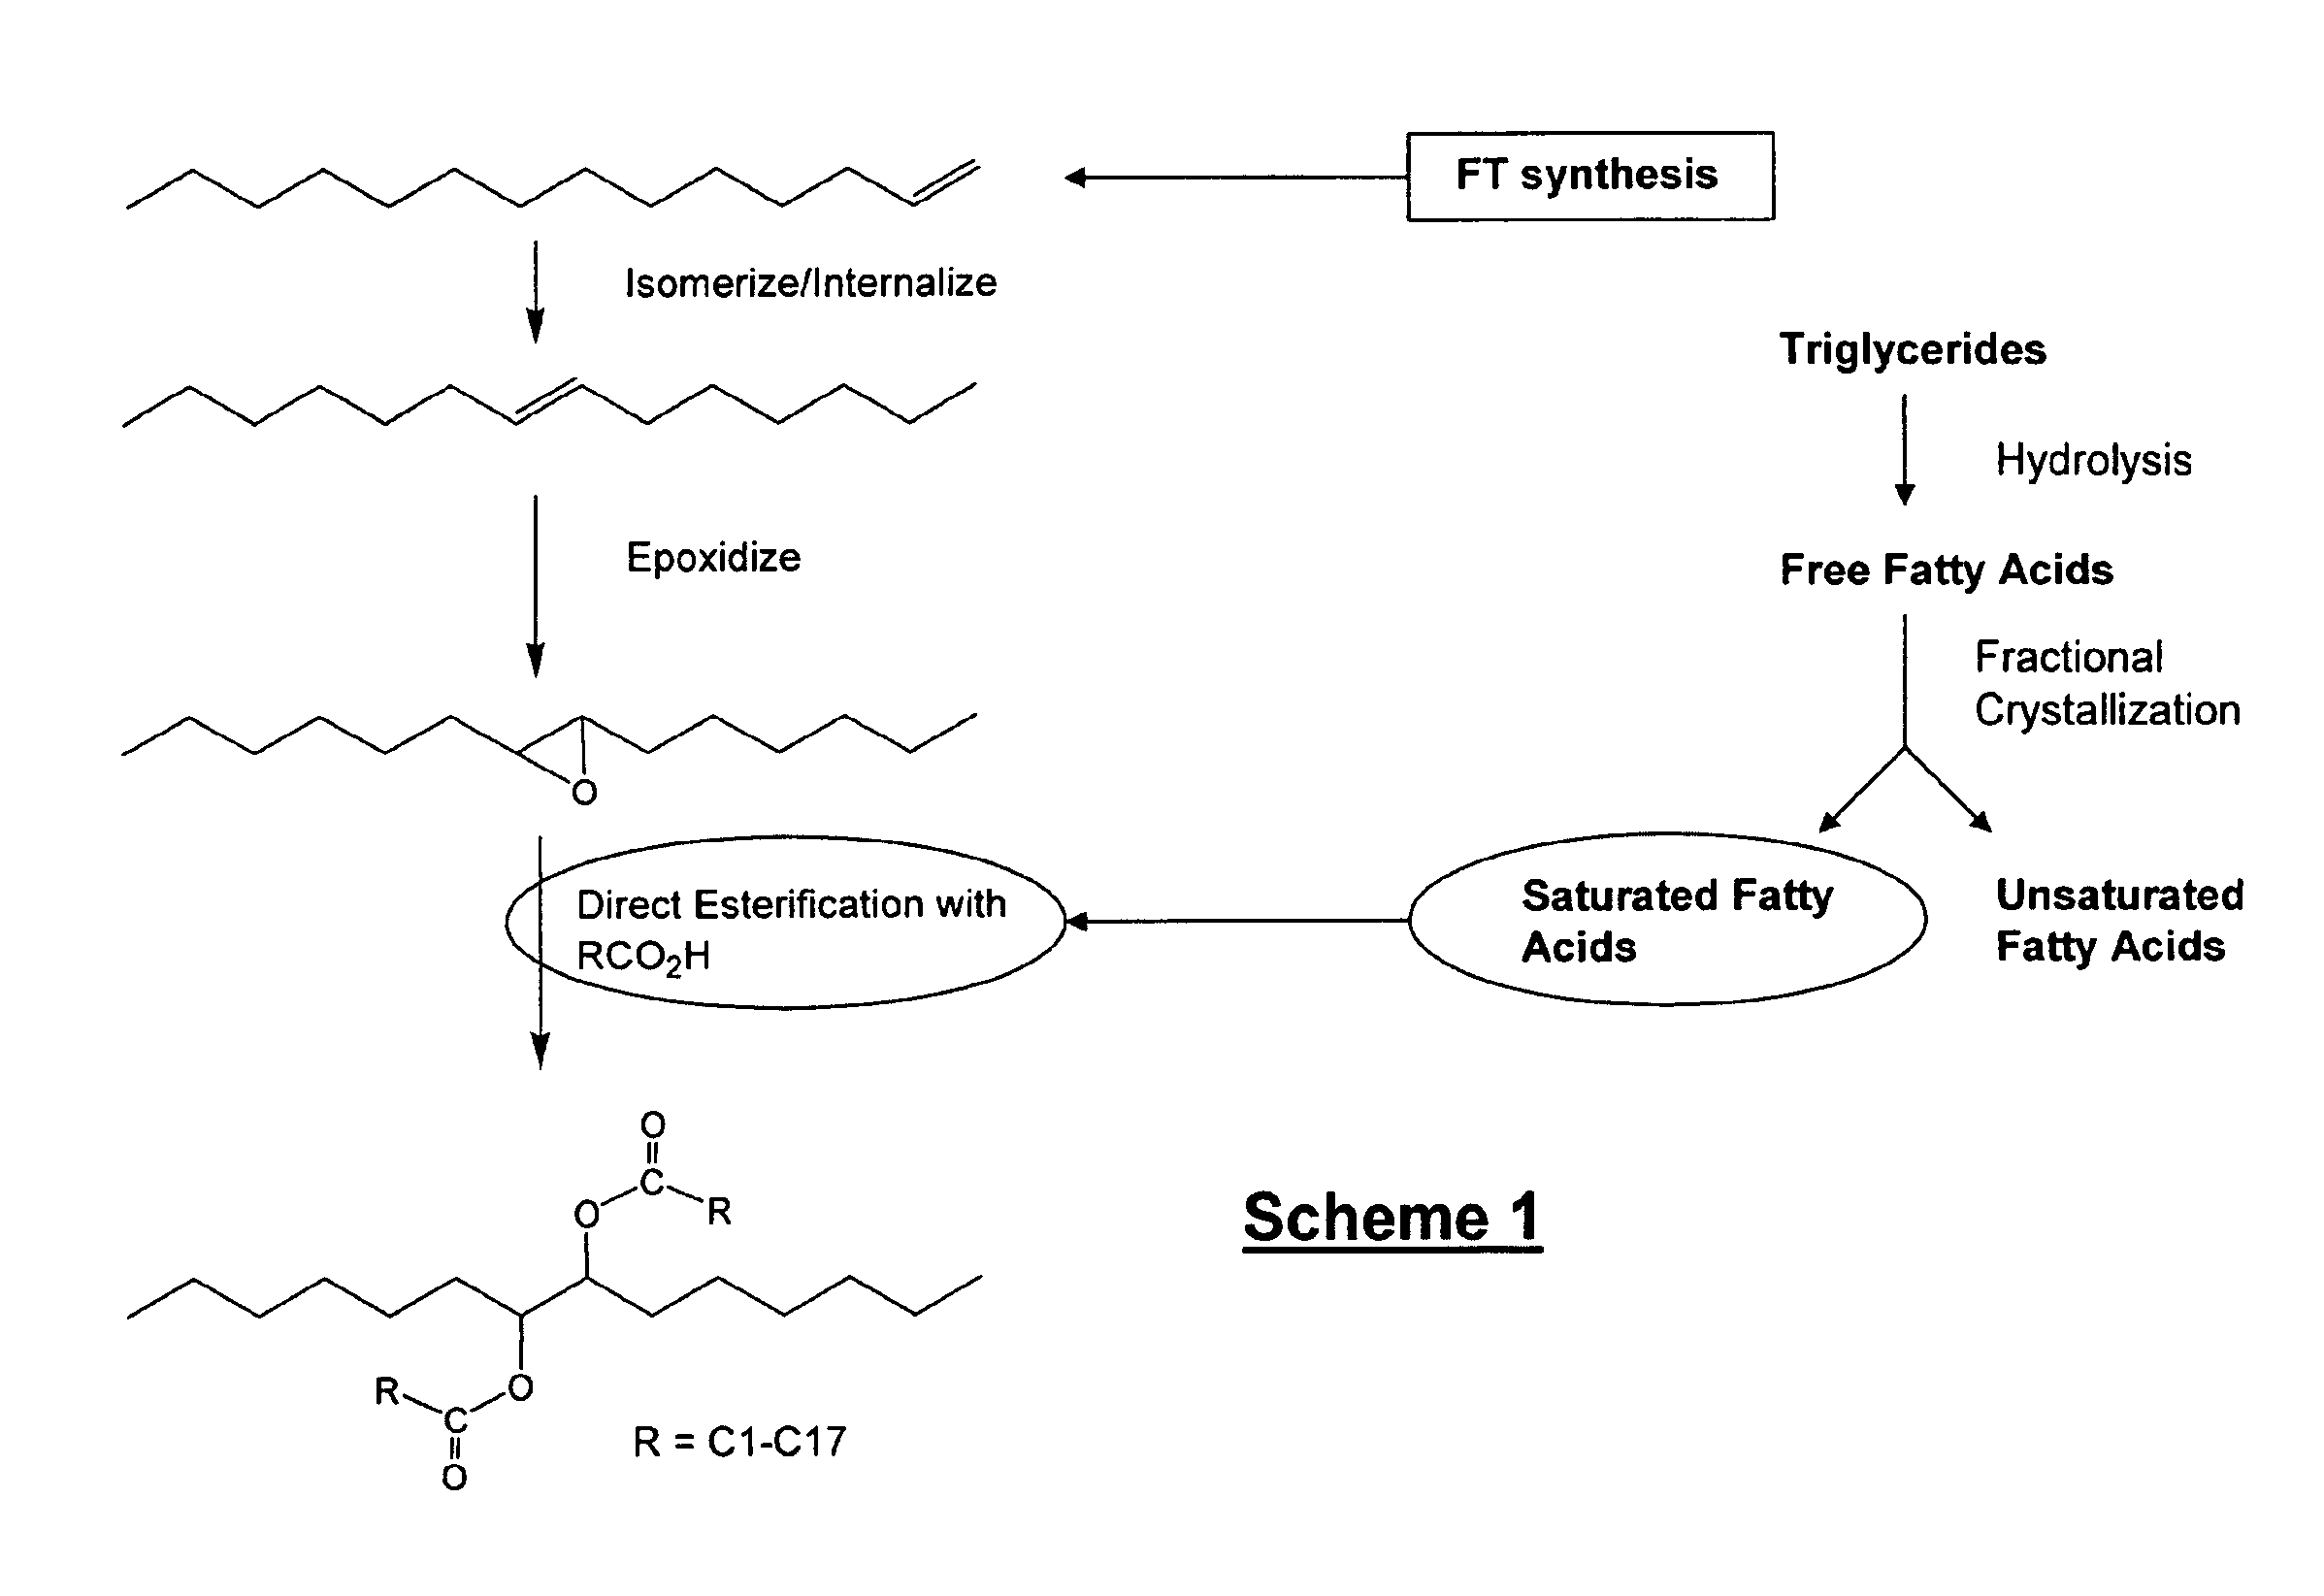 Isolation and subsequent utilization of saturated fatty acids and α-olefins in the production of ester-based biolubricants